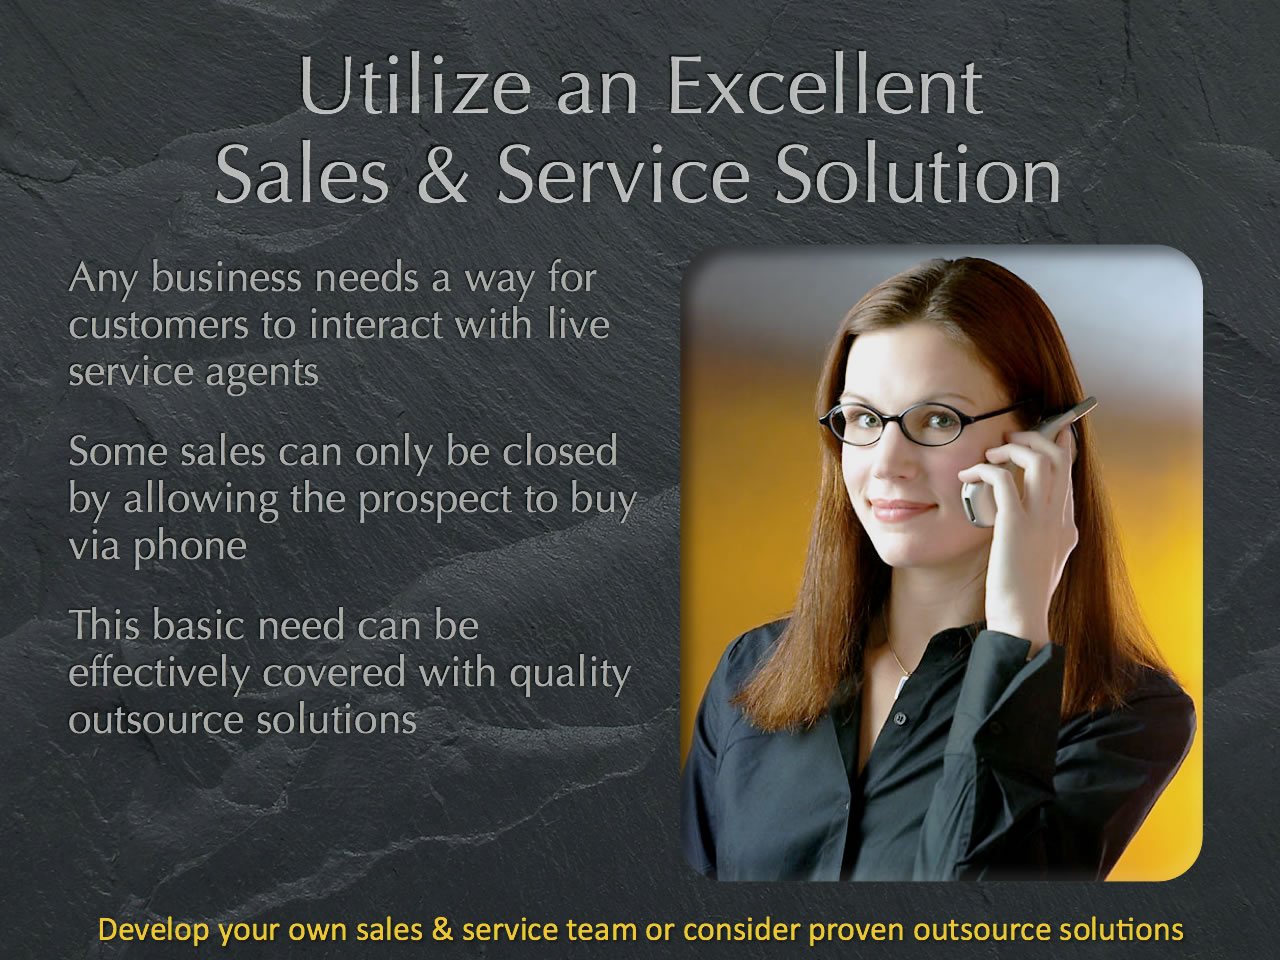 Use an excellent sales and service solution to cover customer and subscriber needs